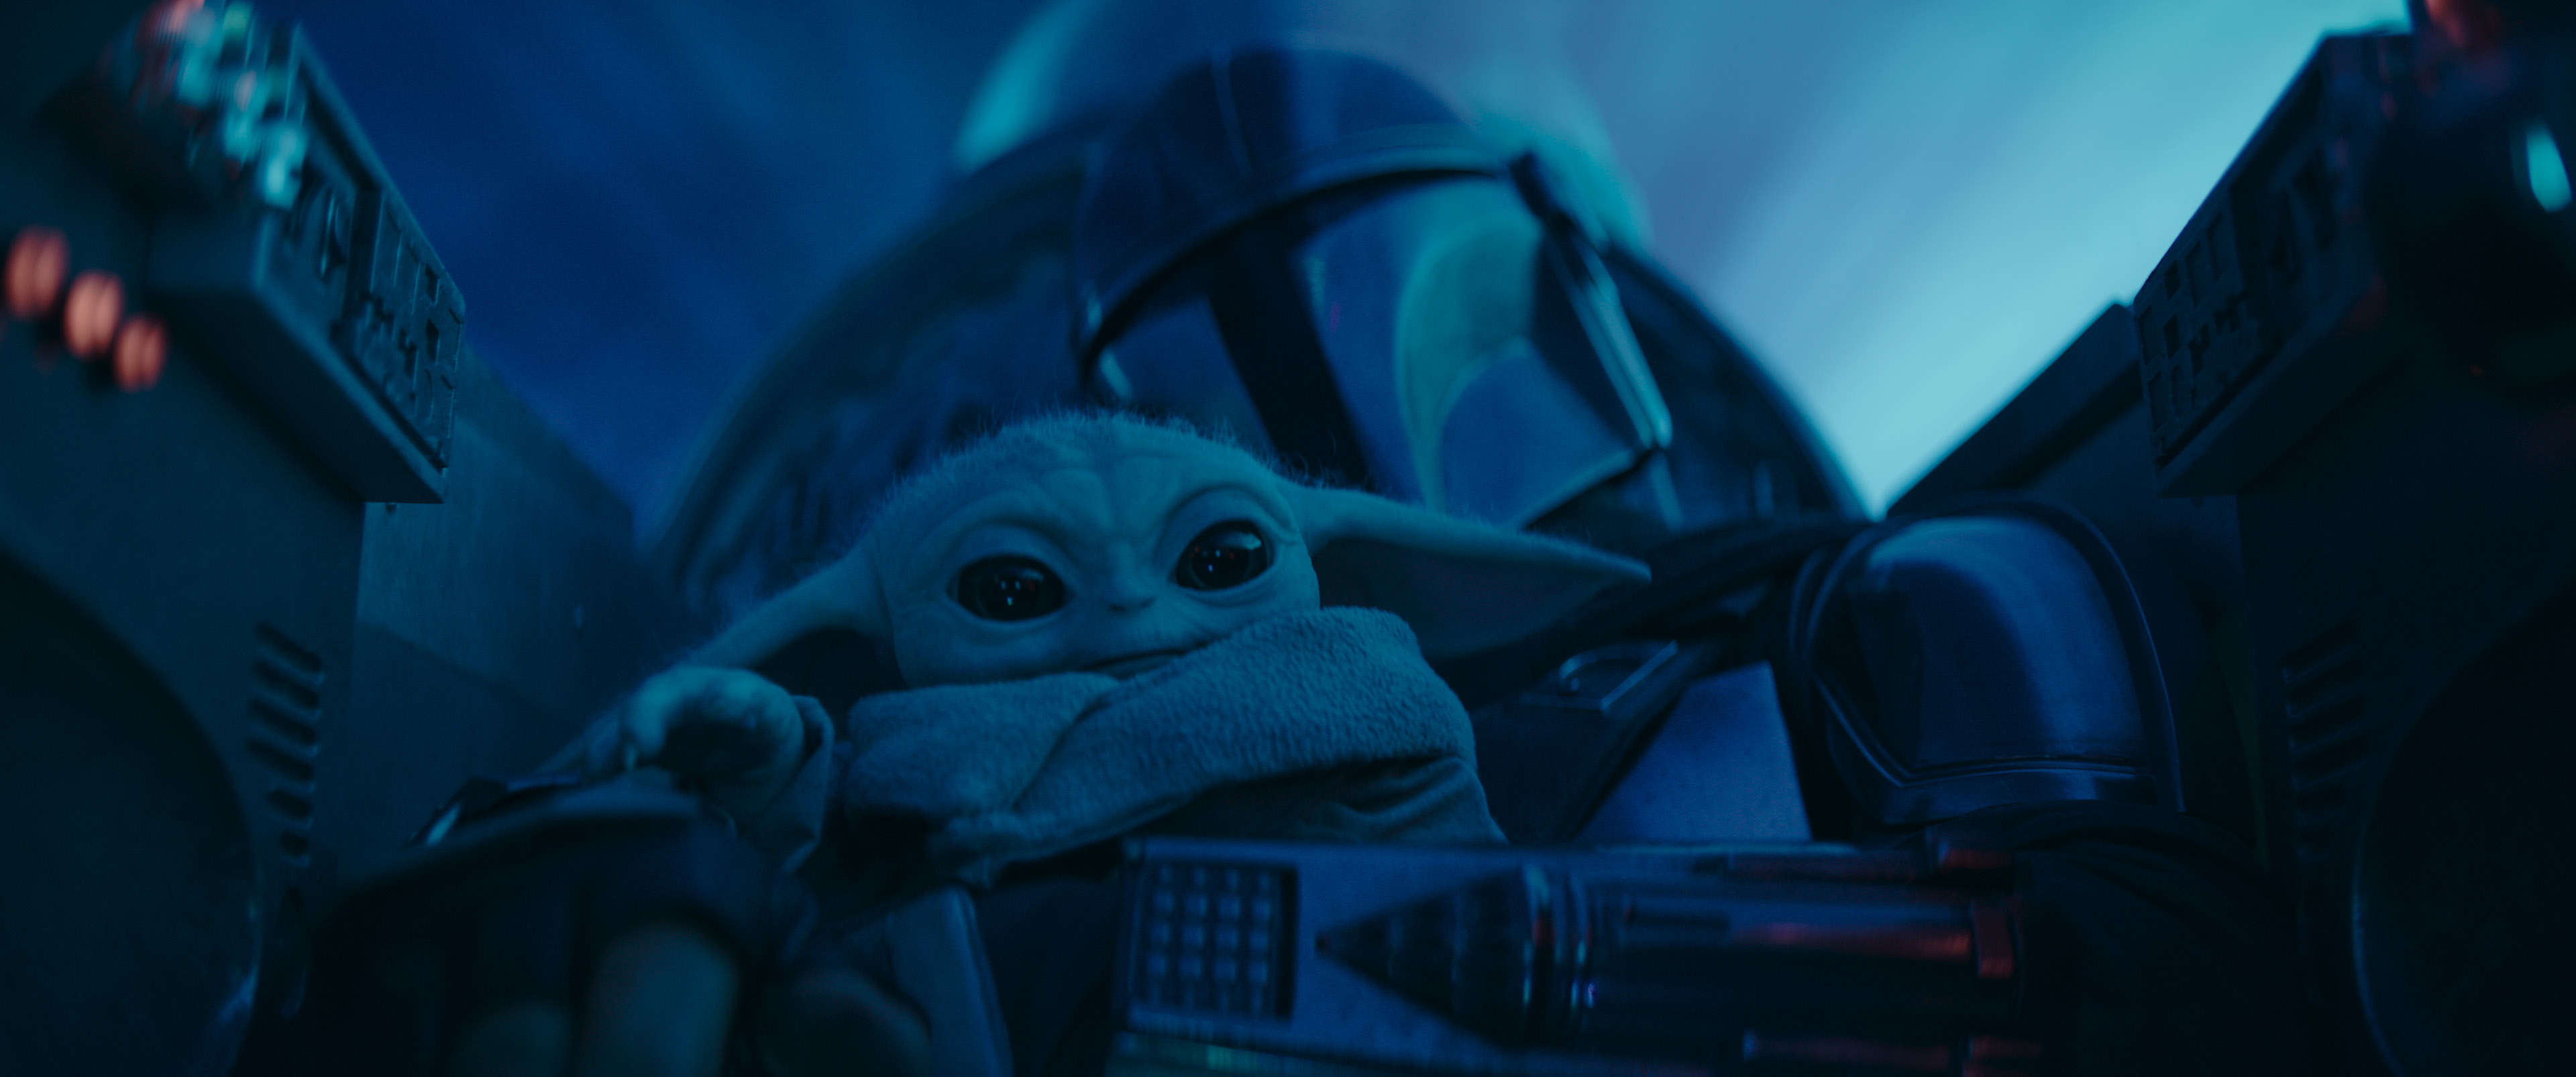 Mando accompanied by "Baby Yoda" on board his ship. Image from the series The Mandalorian on Disney+.